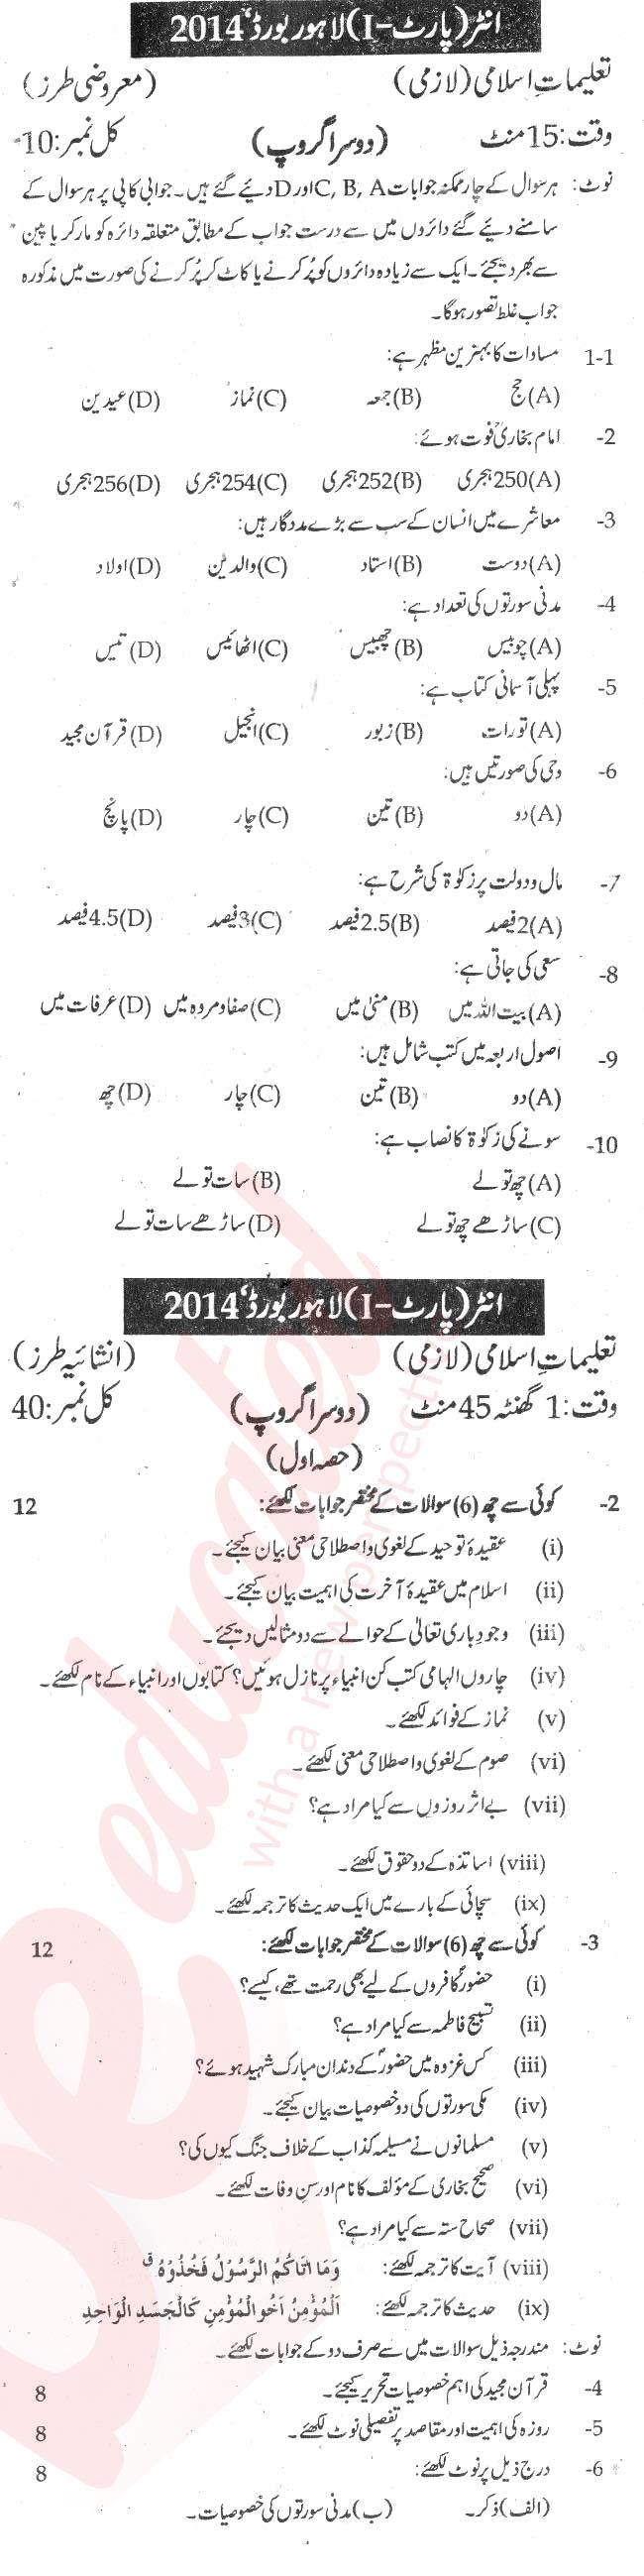 Islamic Studies 11th class Past Paper Group 2 BISE Lahore 2014